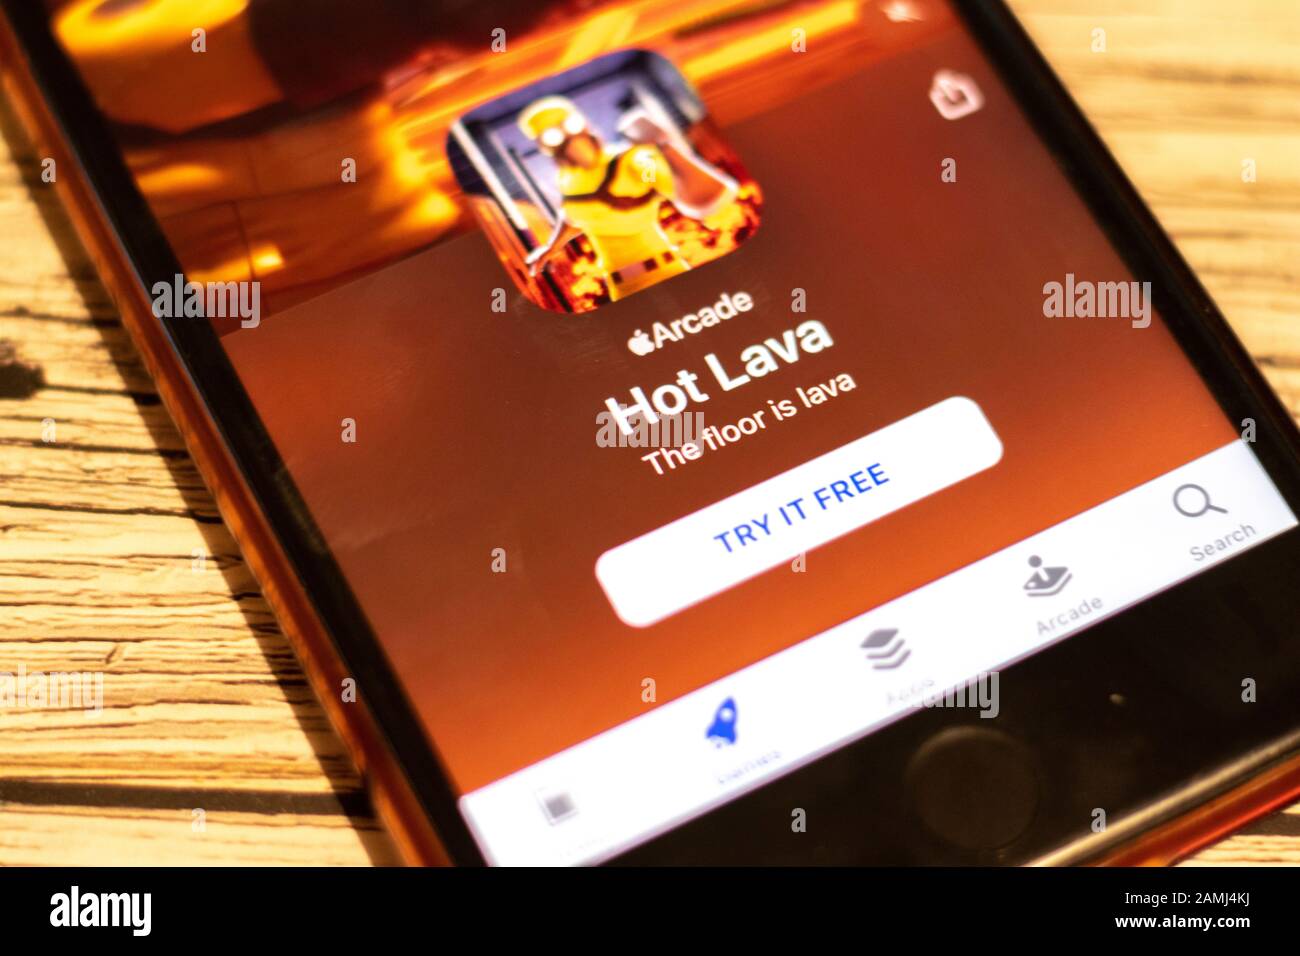 Saint-Petersburg, Russia - 10 January 2020: Hot Lava icon close up on phone screen. Arcade games on app store, Illustrative Editorial Stock Photo